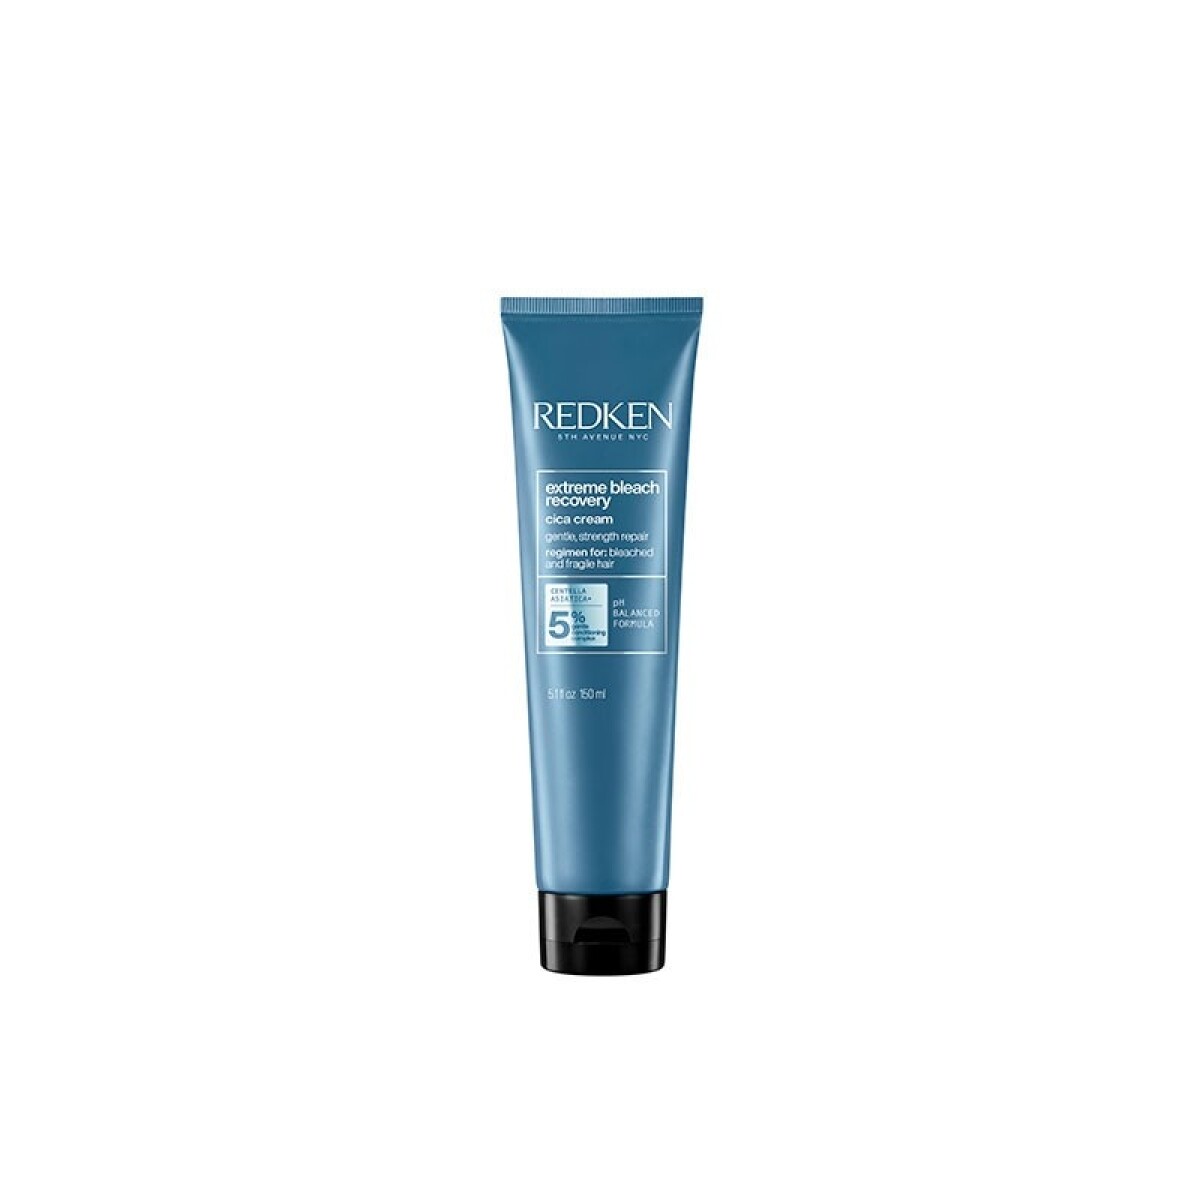 Redken Extreme Bleach Recovery Cica Trat 